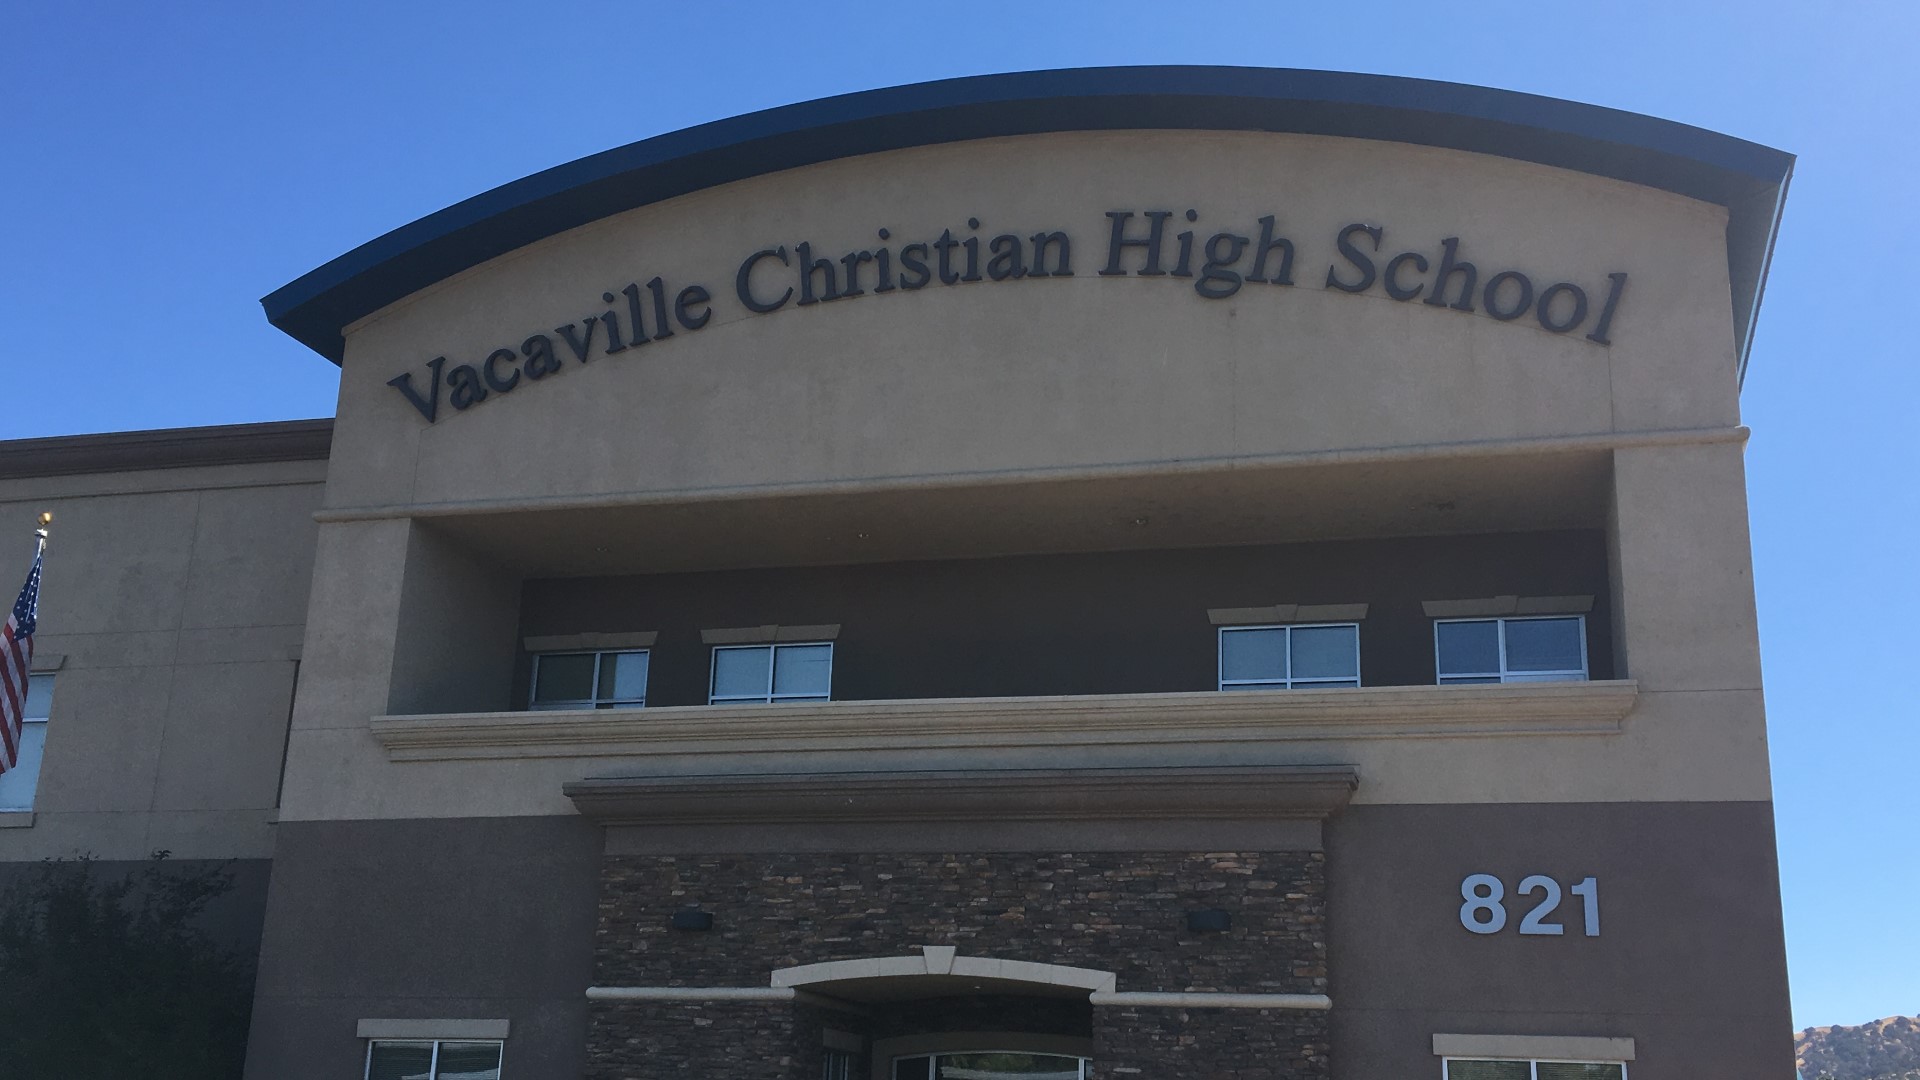 Jack Worthan of Vacaville Christian High School suffered a brutal hit that ultimately caused bleeding on his brain.